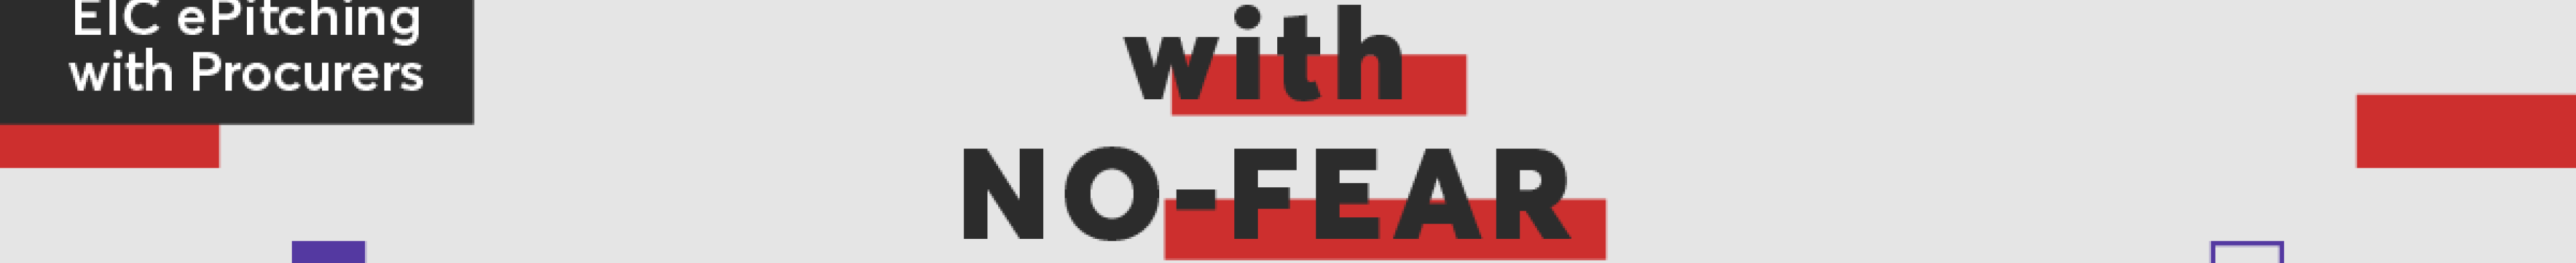 banners_eic_nofear.png